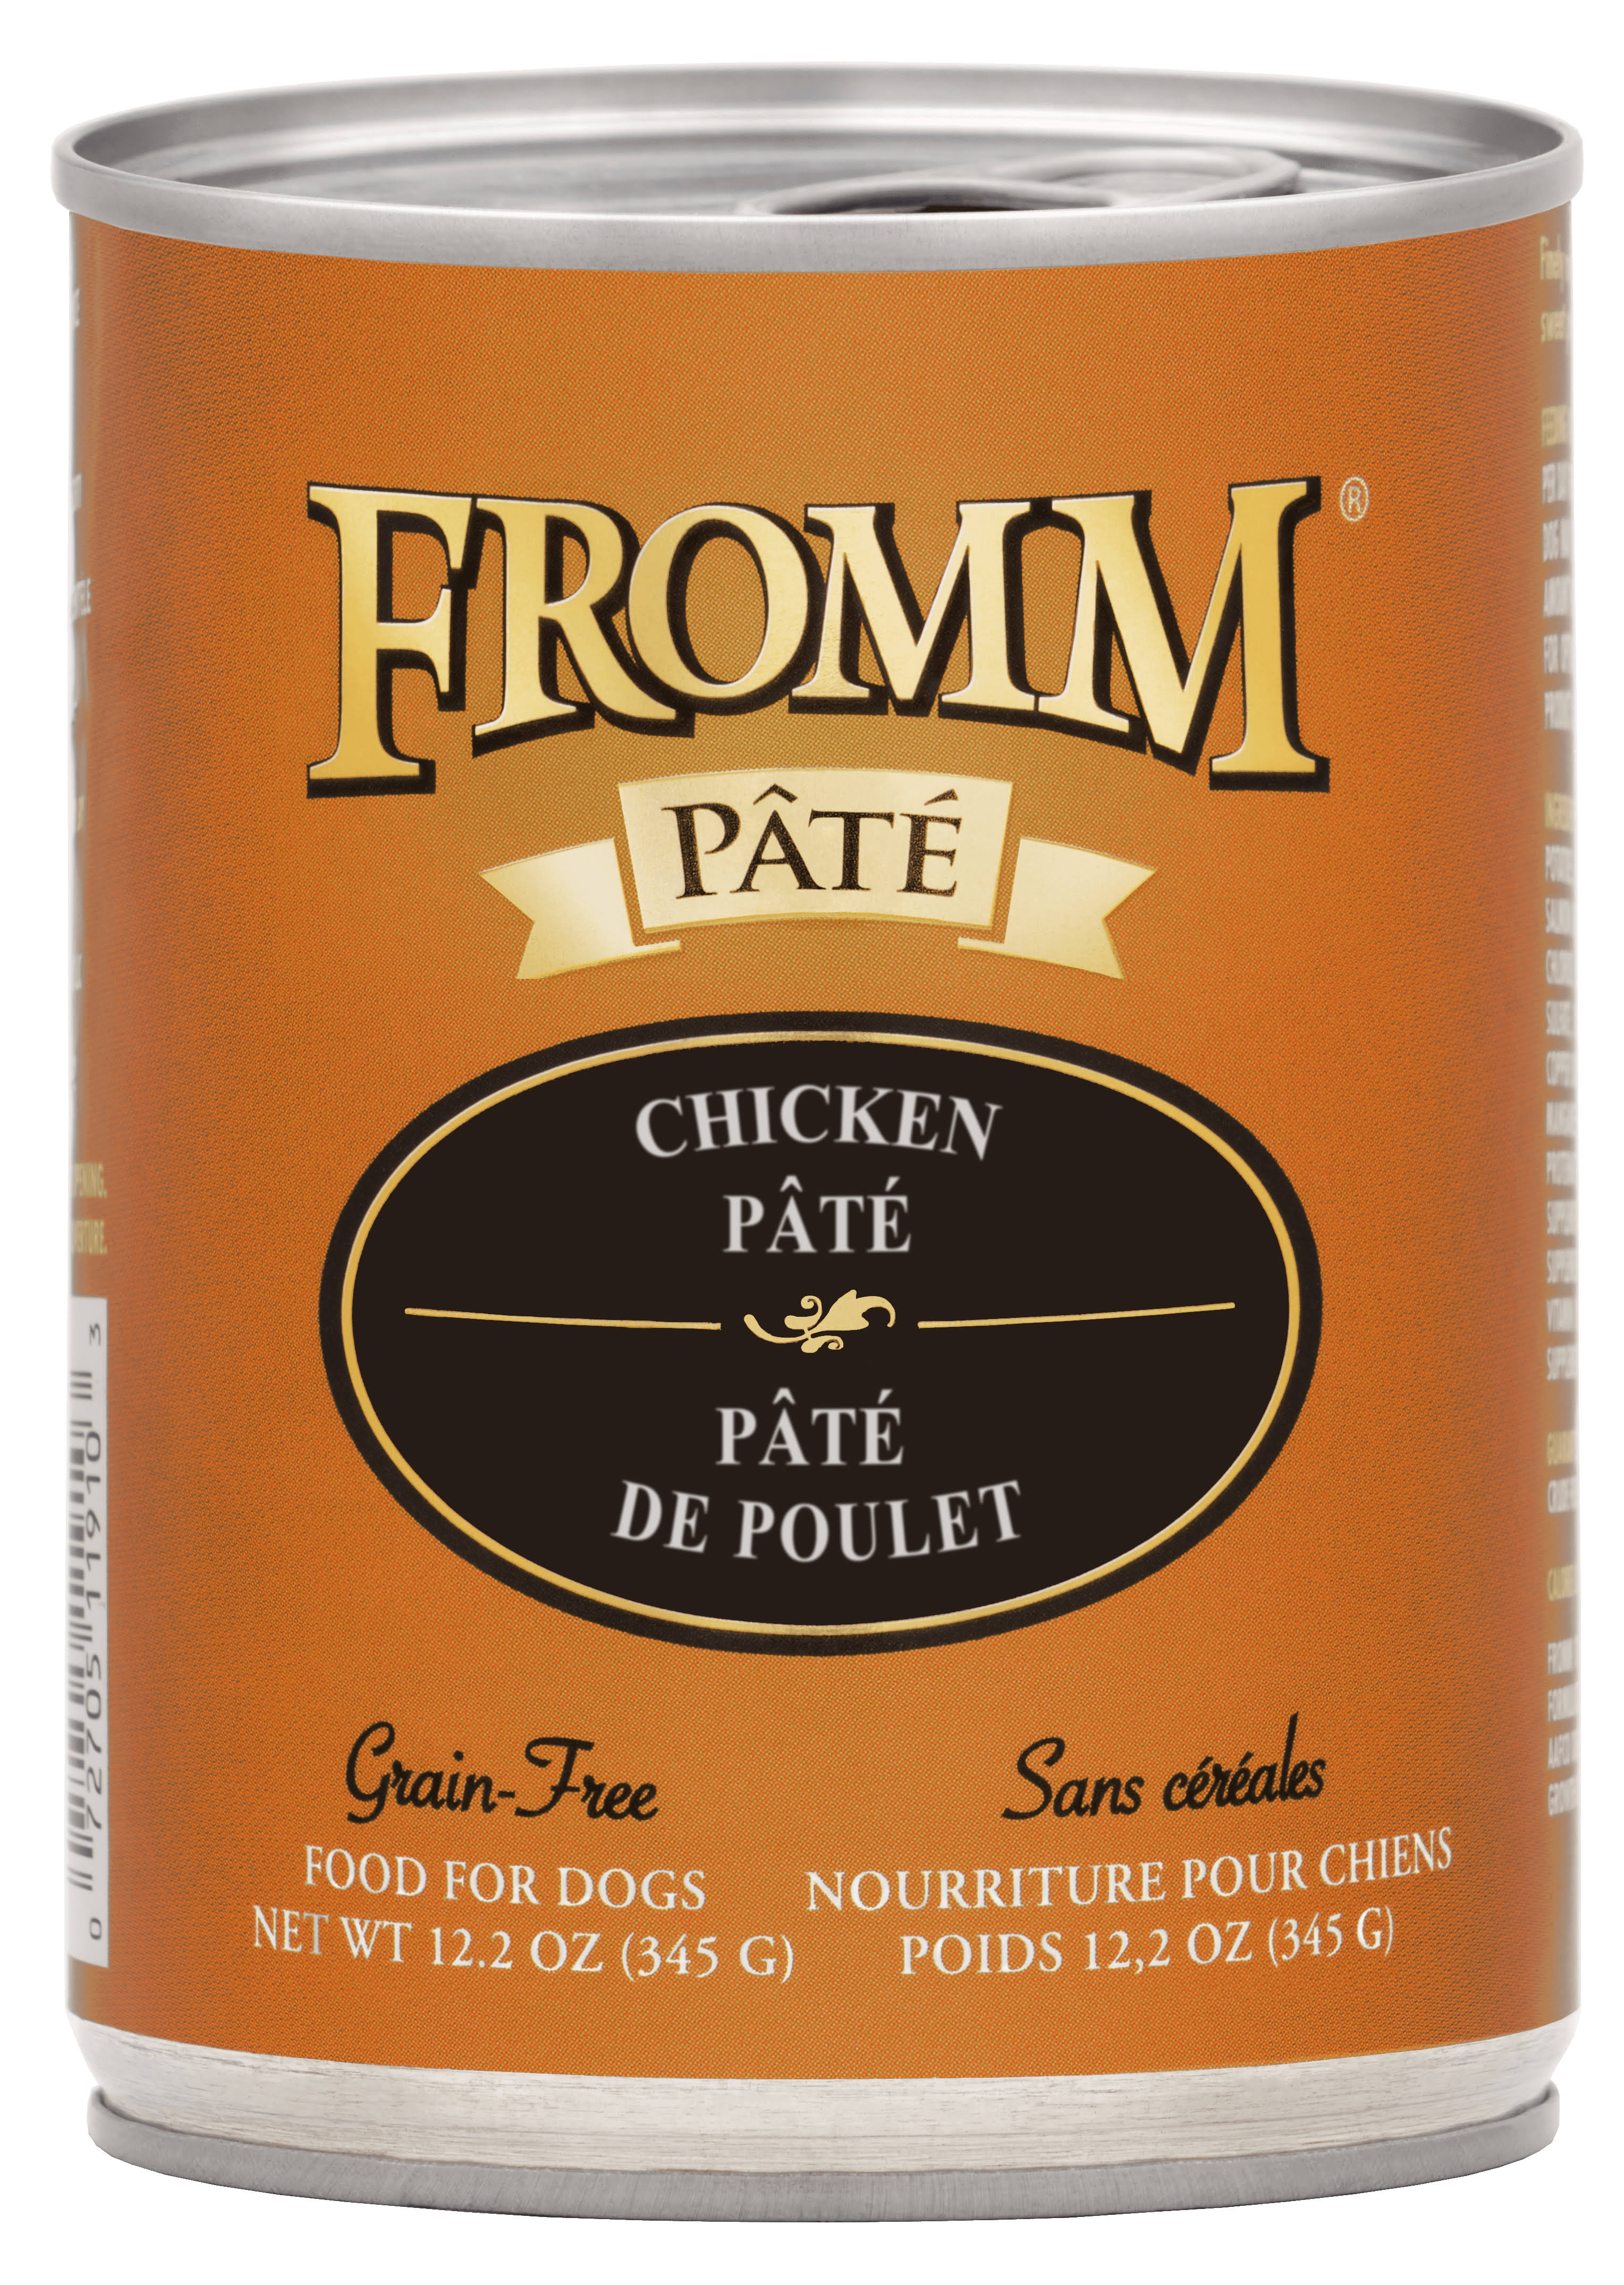 Fromm Pate Grain-Free Chicken Pate Canned Dog Food 12.2oz/12